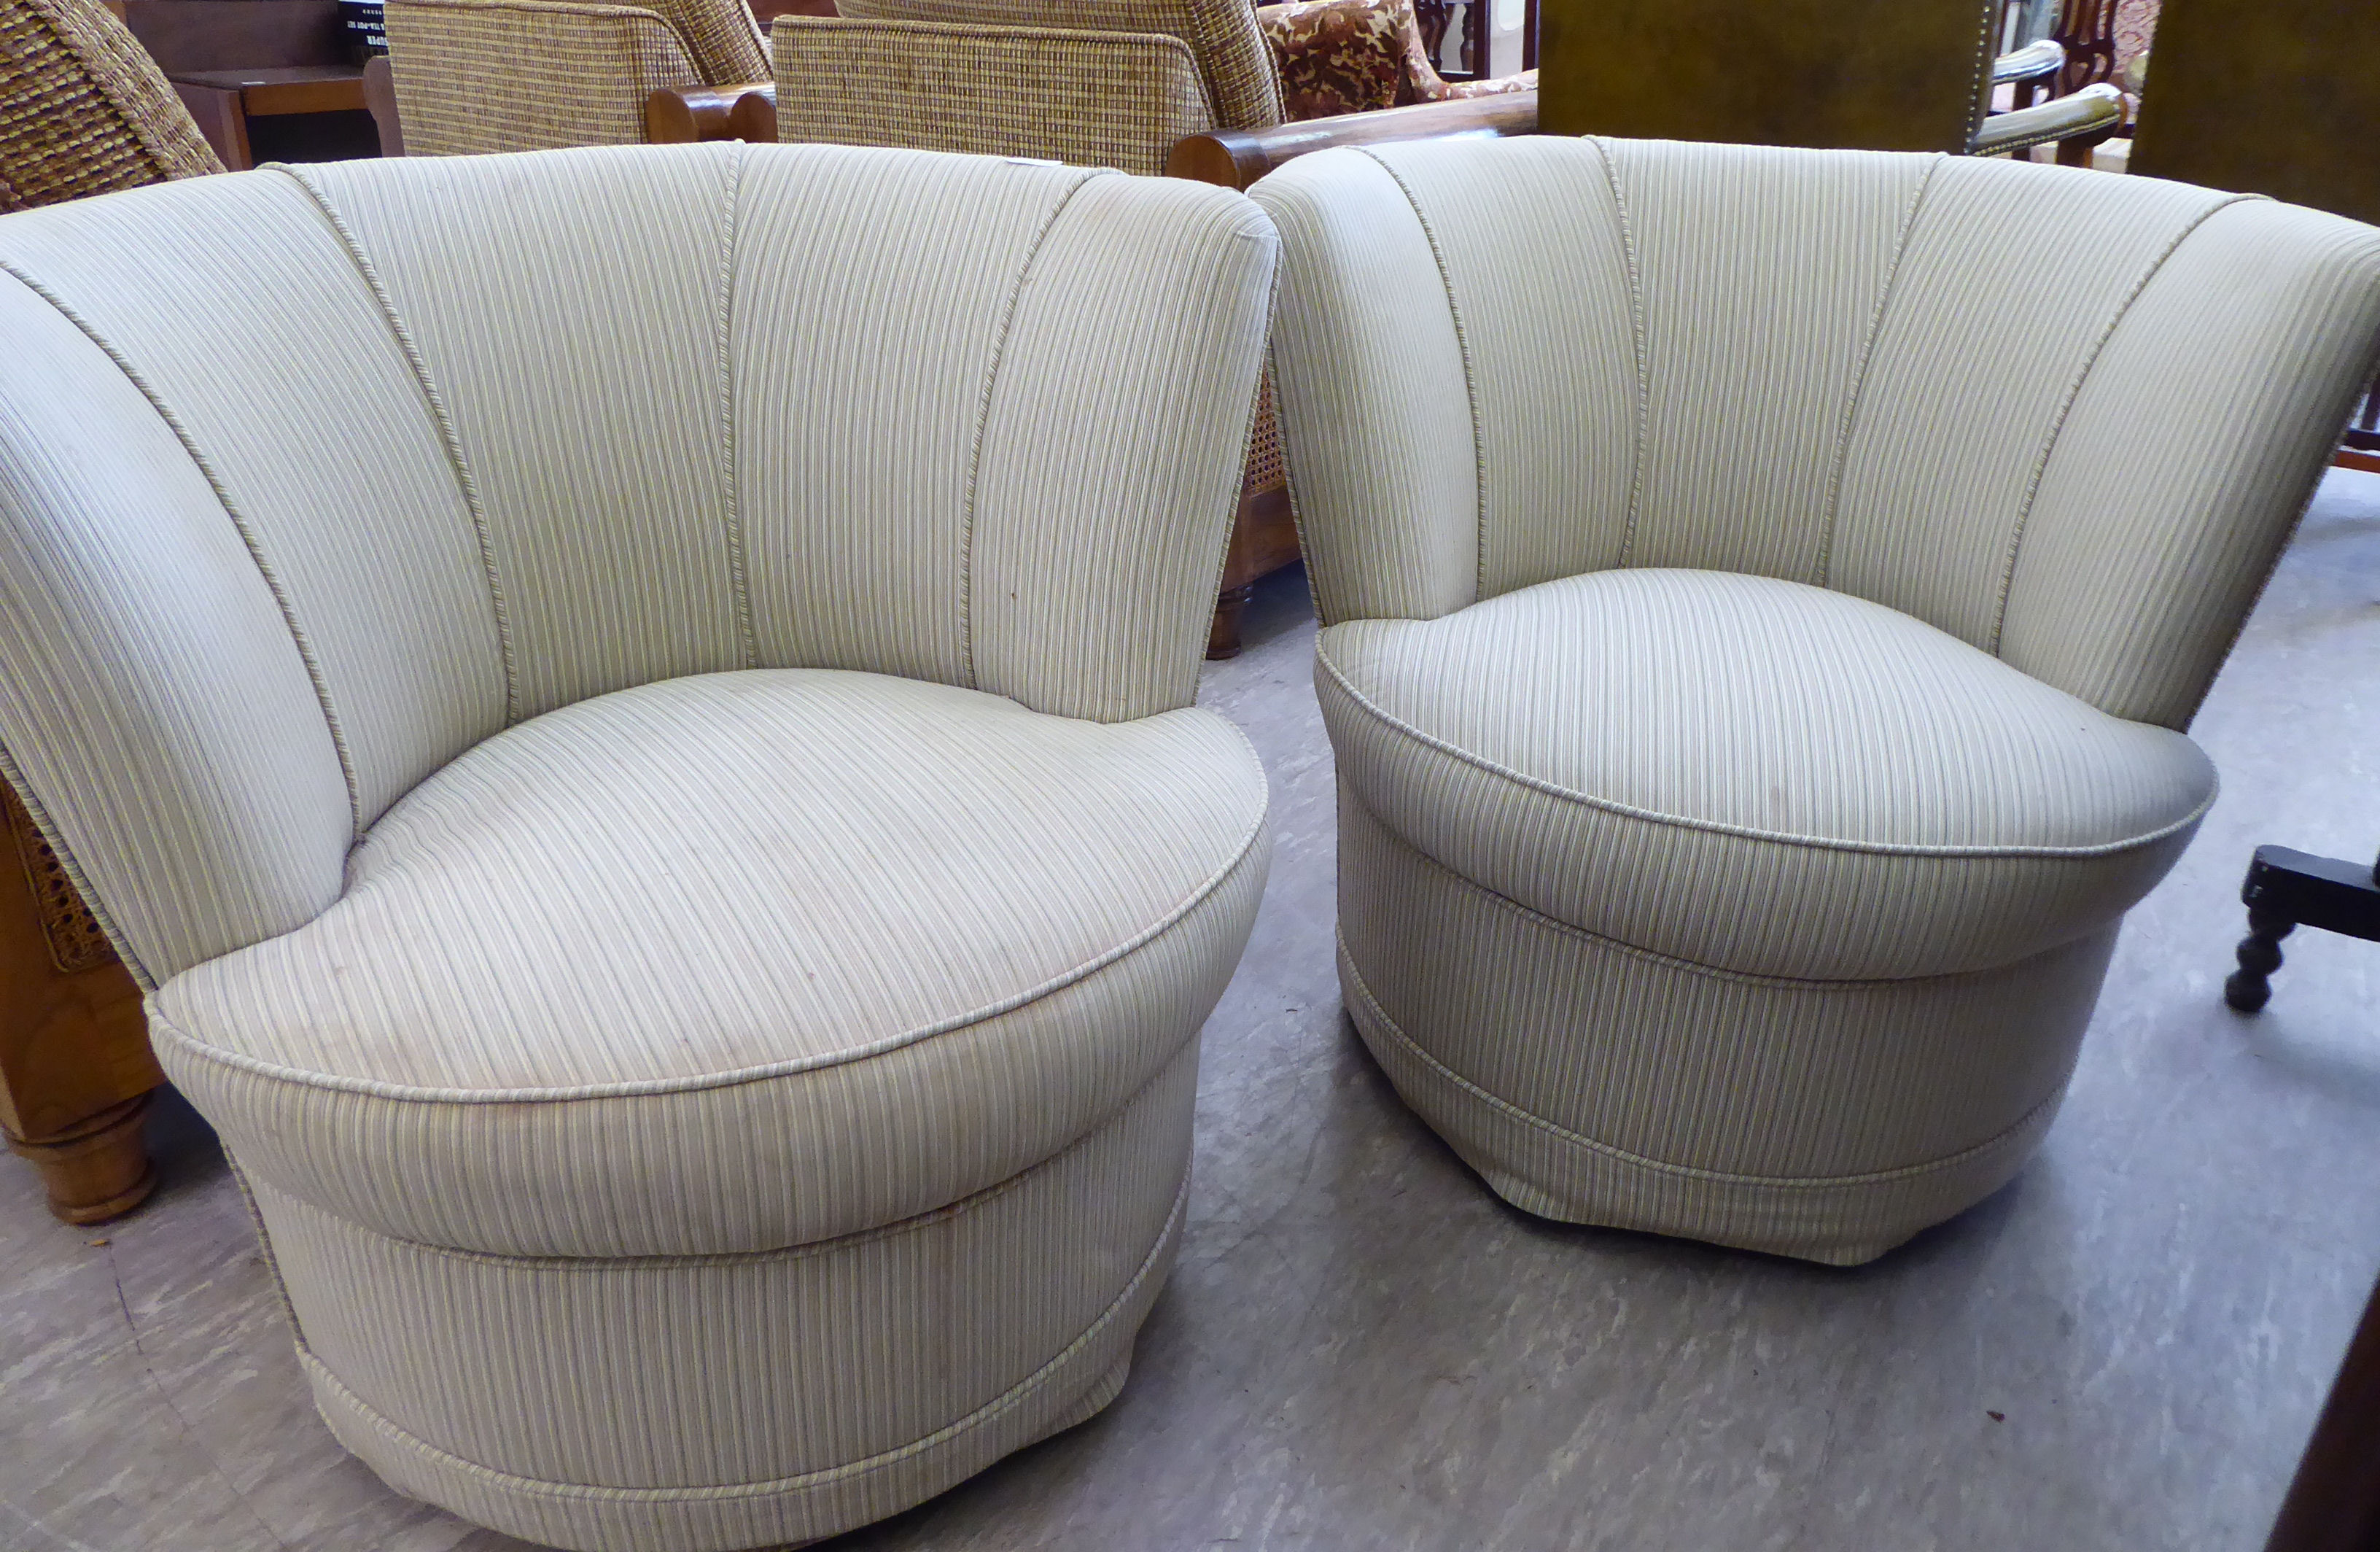 A pair of modern tub design bedroom chairs, each with a fan shaped back,